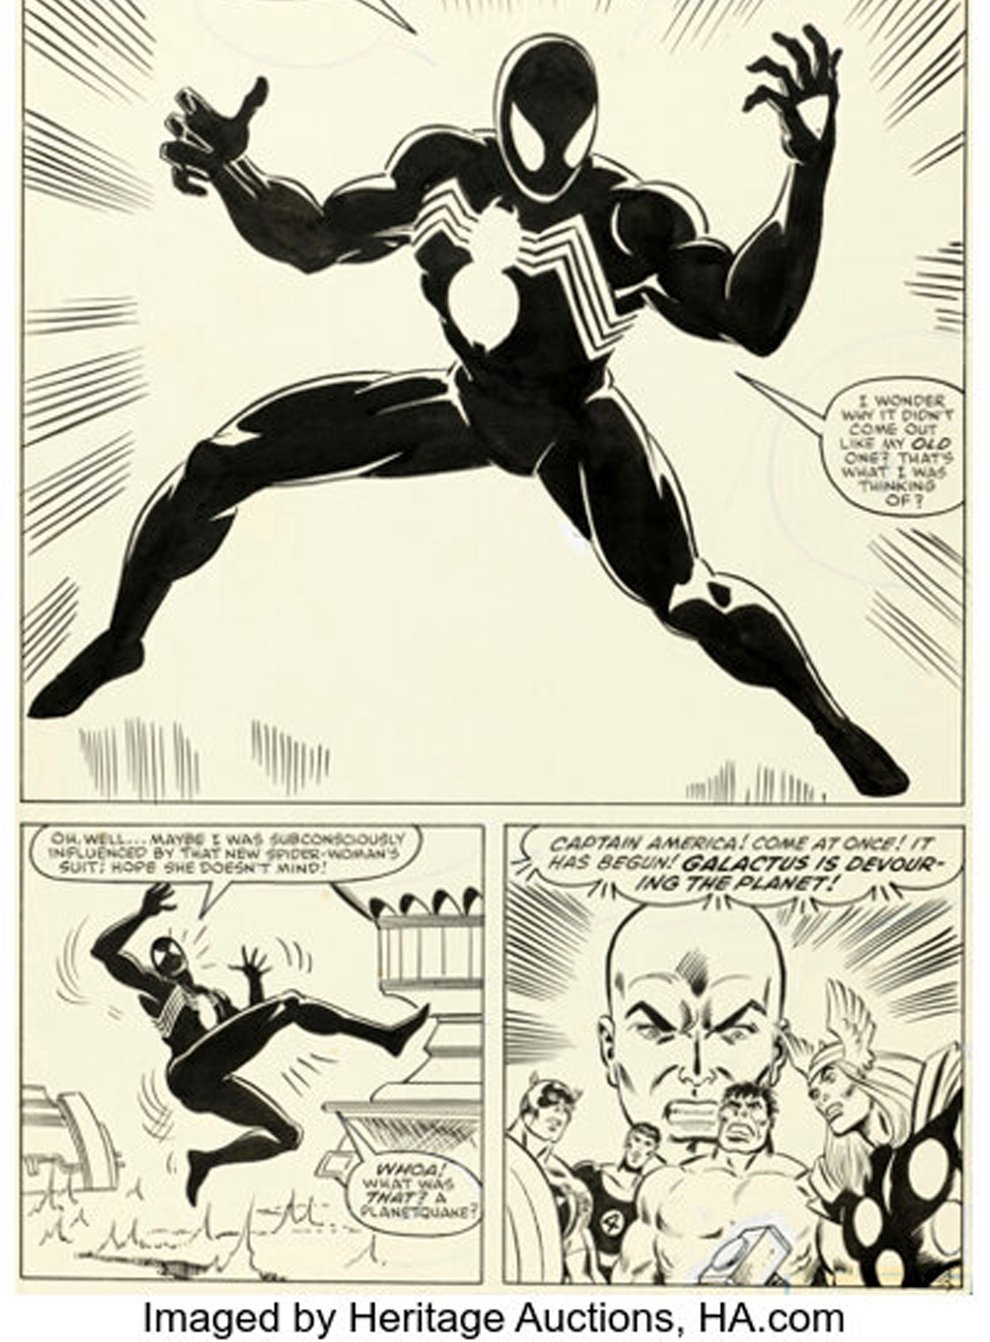 Page 25 from the 1984 Marvel comic Secret Wars No 8 (Heritage Auctions via AP)